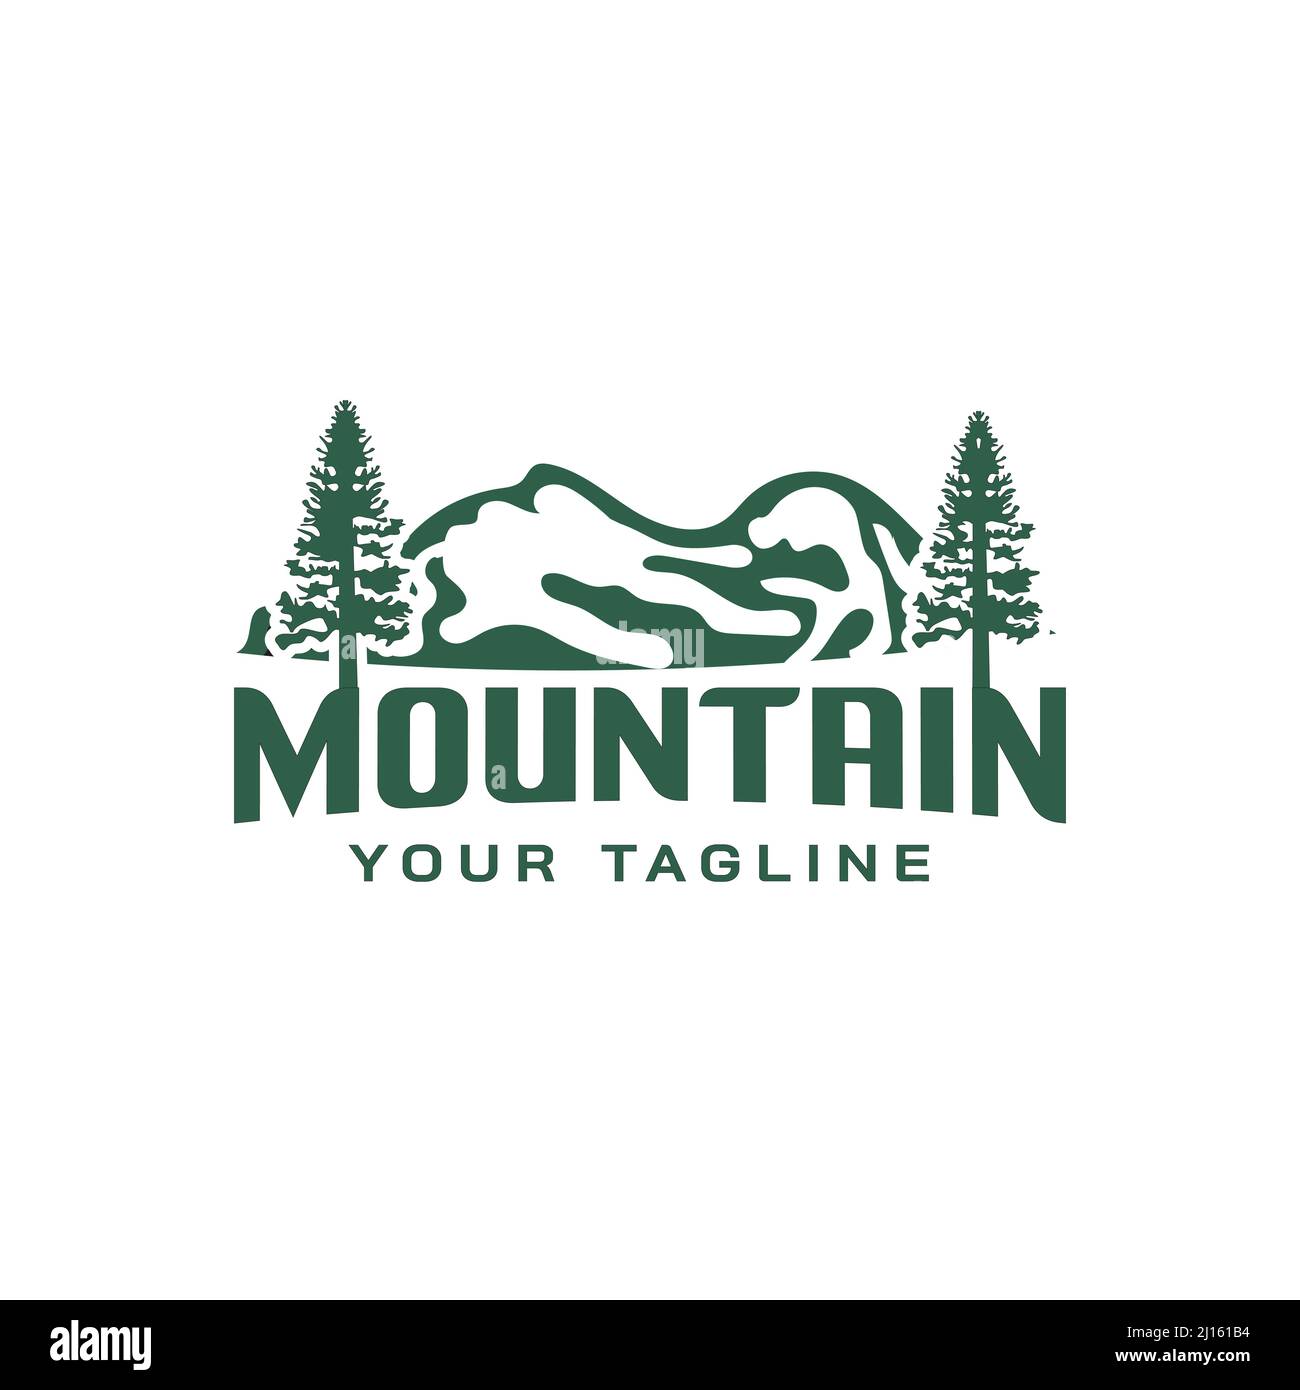 Mountain Vector Logo Template. The main symbols of the logo are two trees, this logo symbolizes nature, peace and tranquility, this logo also looks mo Stock Vector